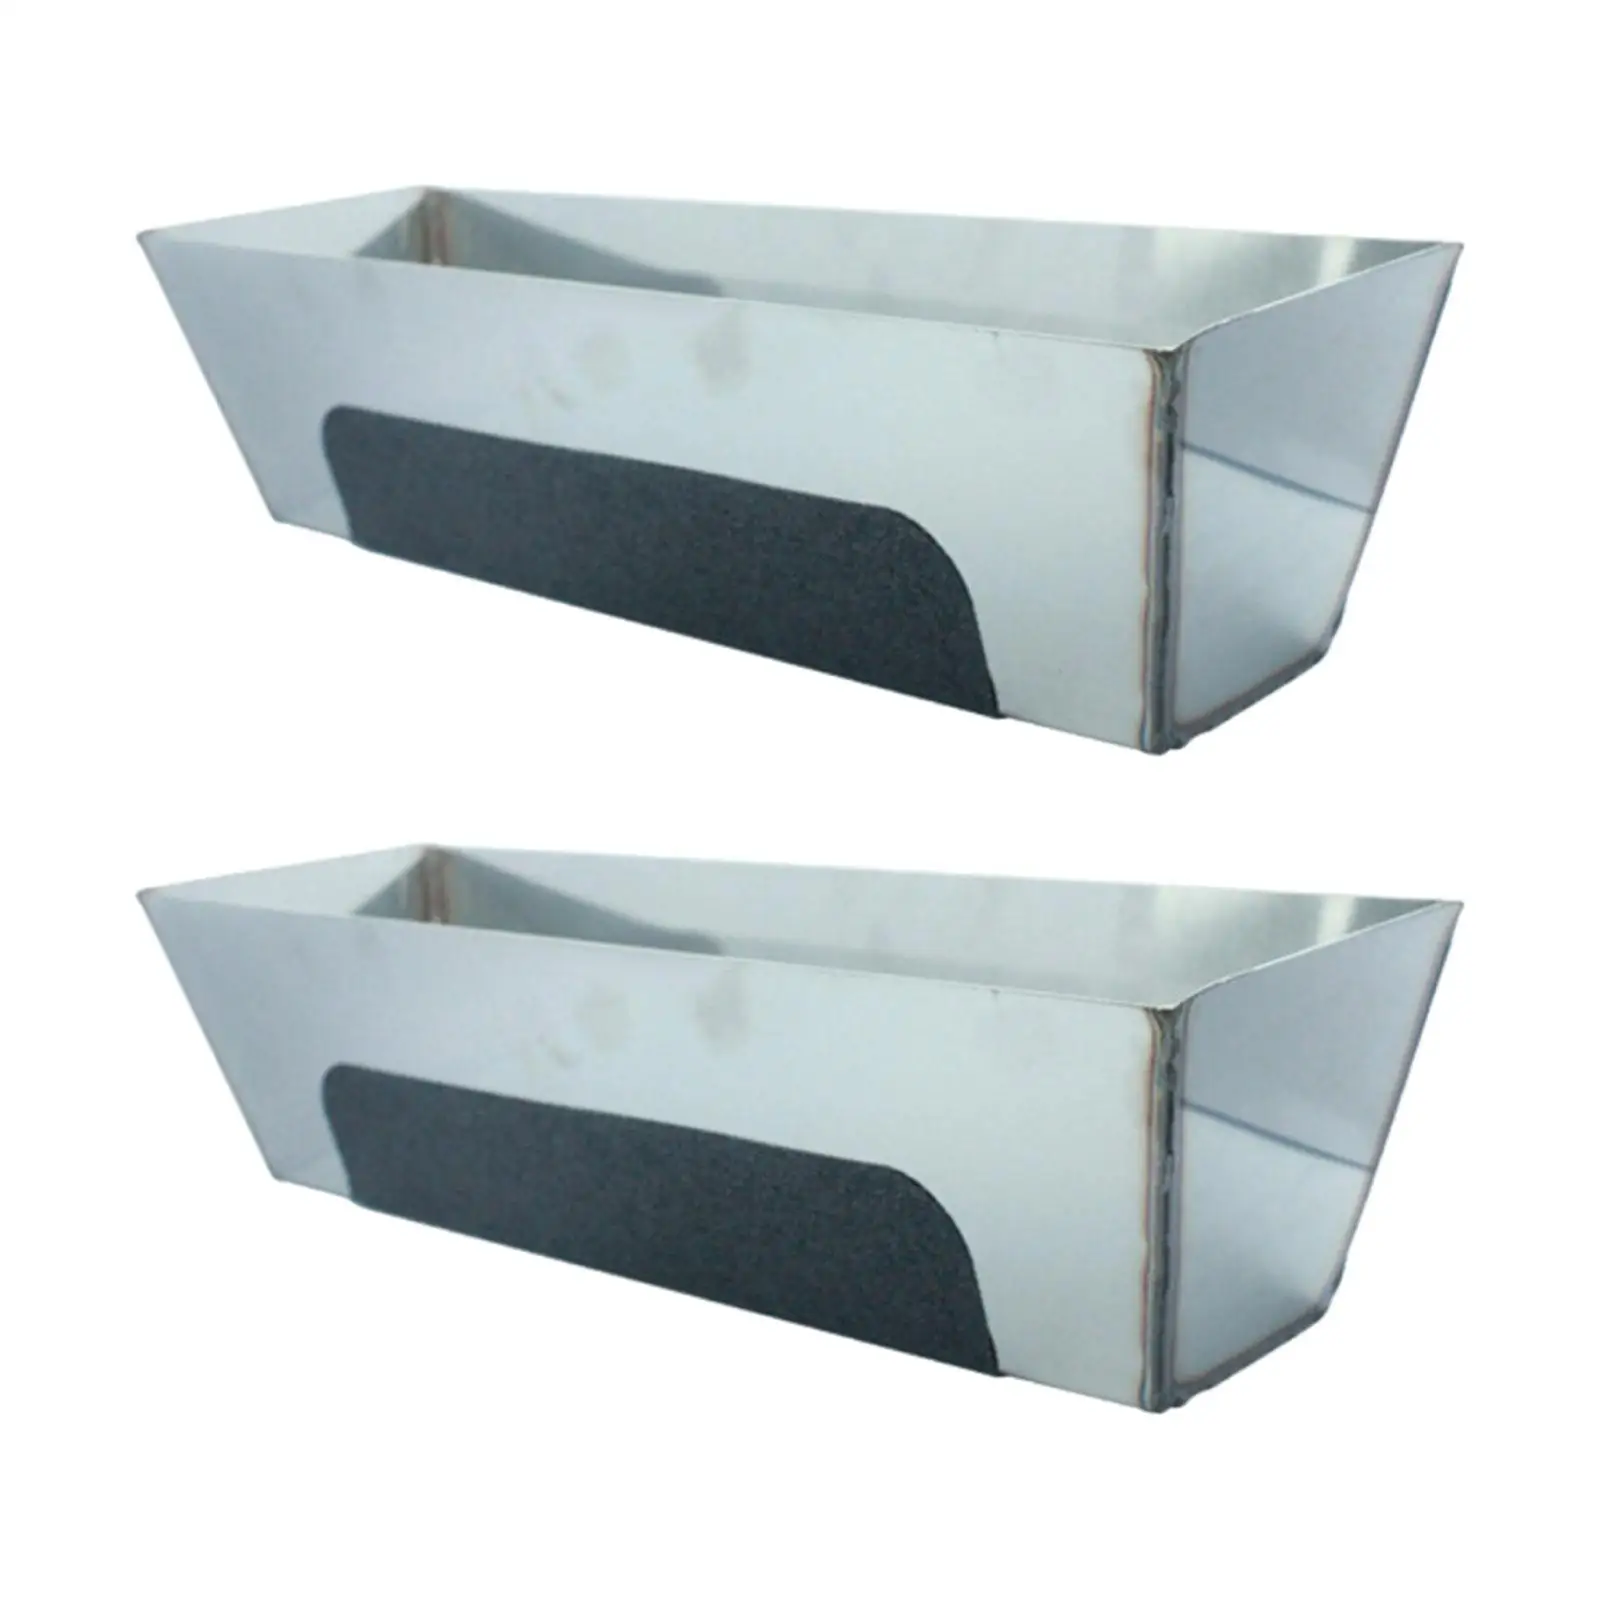 Stainless Steel Mud Pan Mud Pan Fittings Drywall Sheared Edges Anti Slip Trays Plastering Plasterers for Easy Knife Cleaning